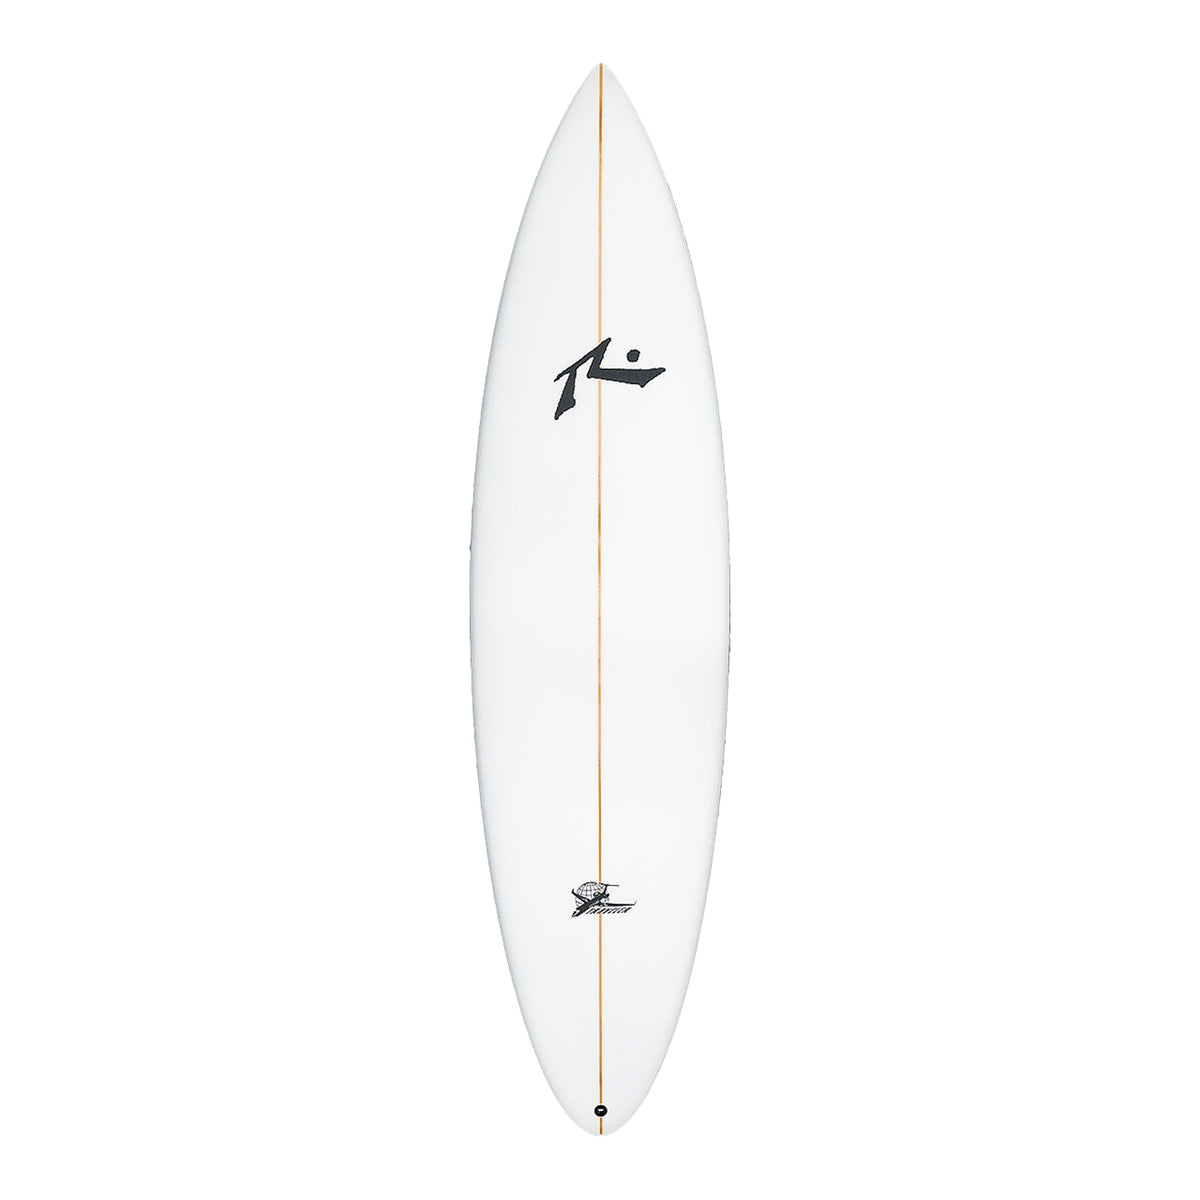 New Traveler - Made To Order - Step Up - Rusty Surfboards - Deck View